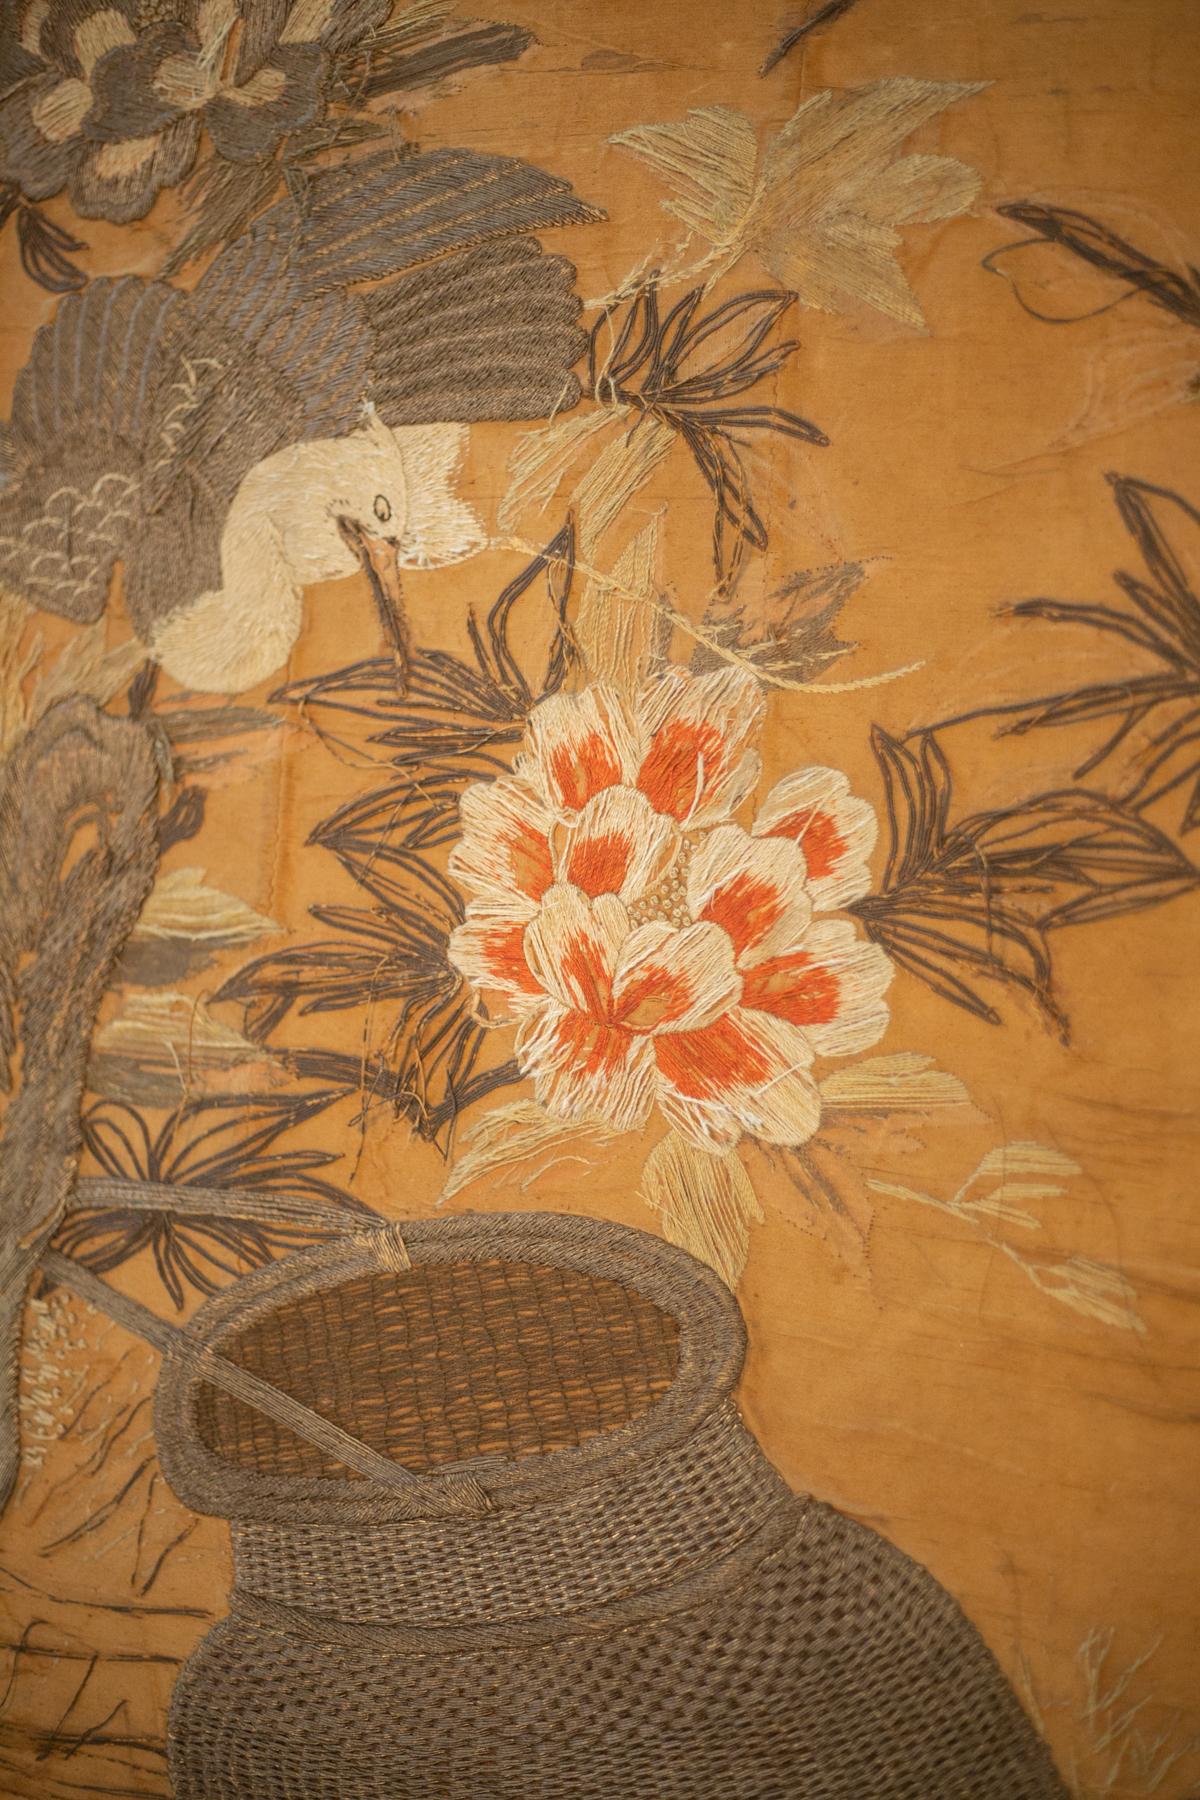 20th Century Antique Chinese Silk Tapestry of Birds among Cherry Blossoms, Hand-Woven